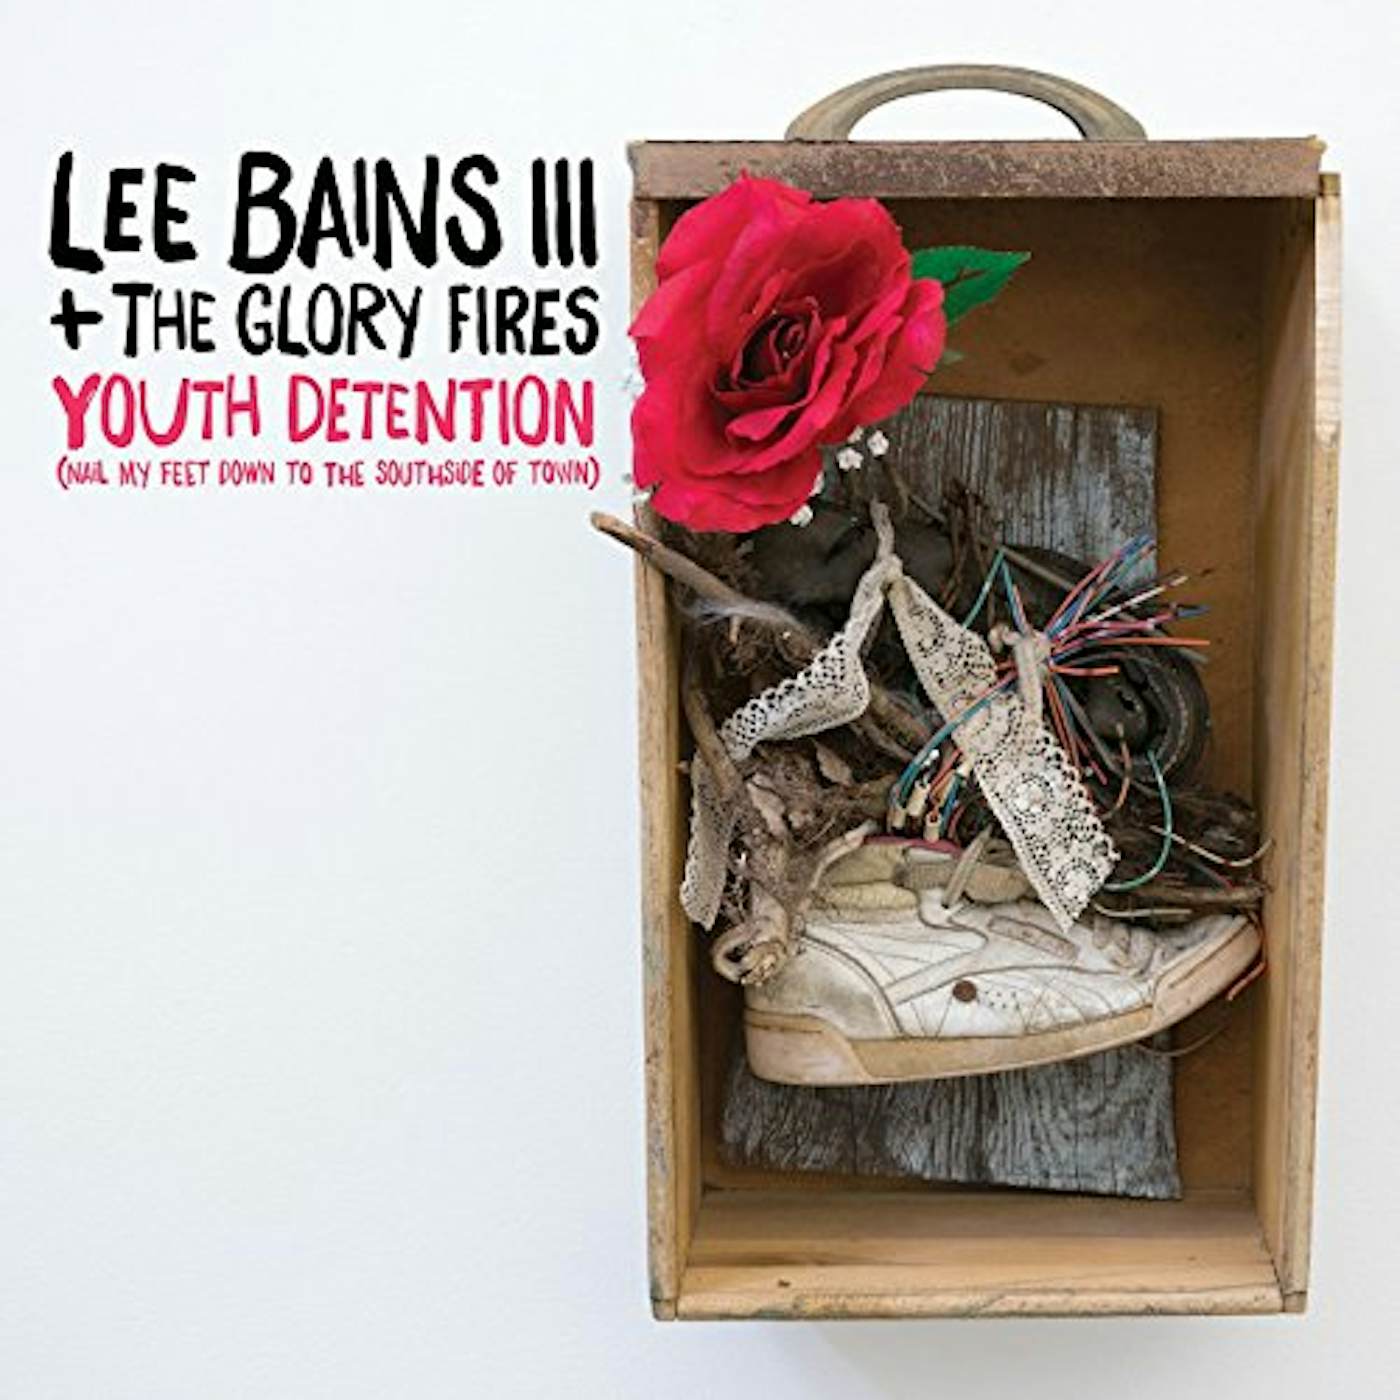 Lee Bains + The Glory Fires YOUTH DETENTION CD